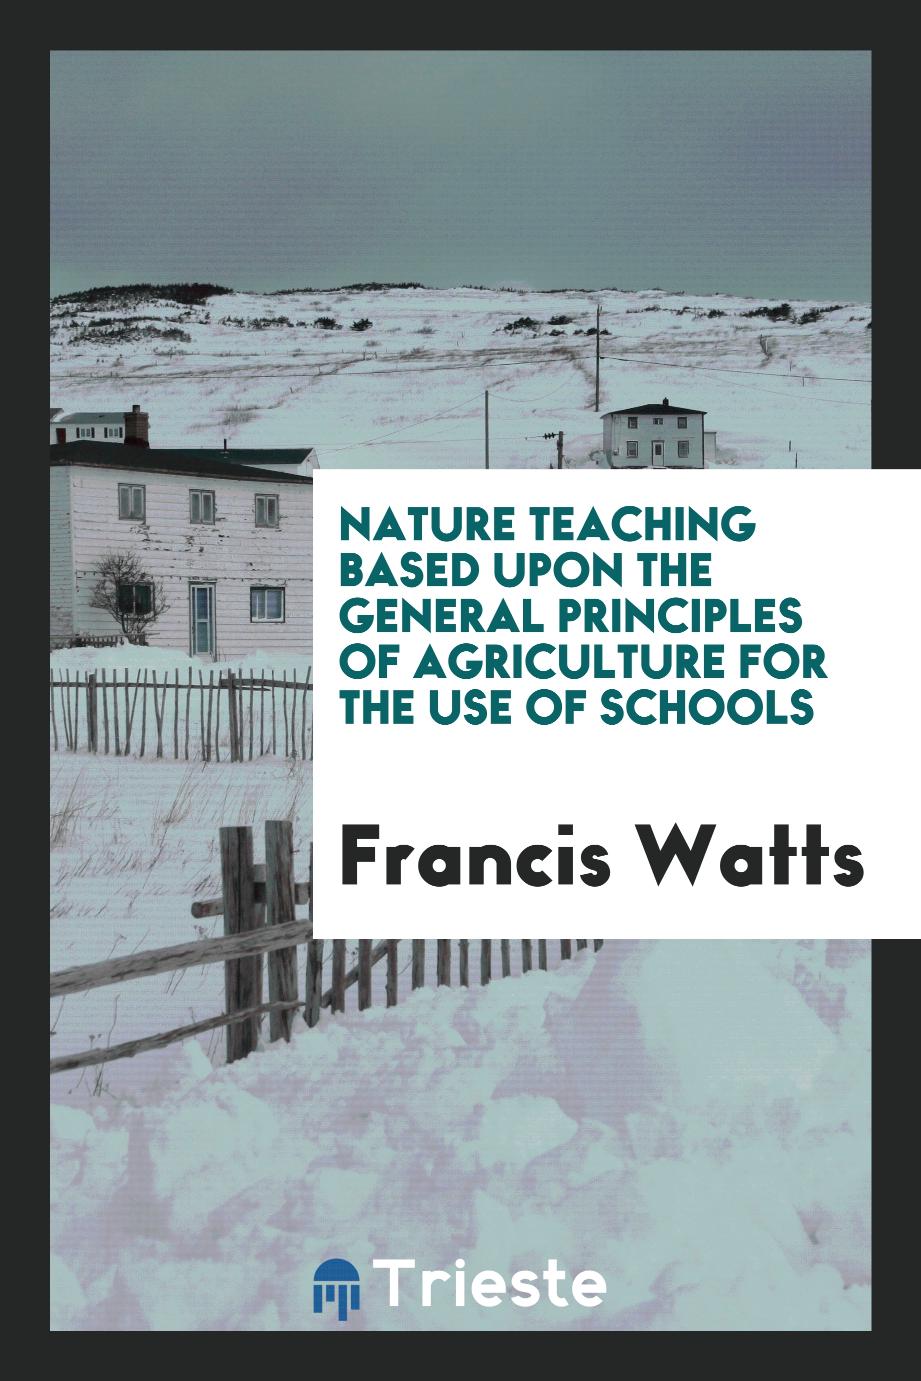 Nature teaching based upon the general principles of agriculture for the use of schools